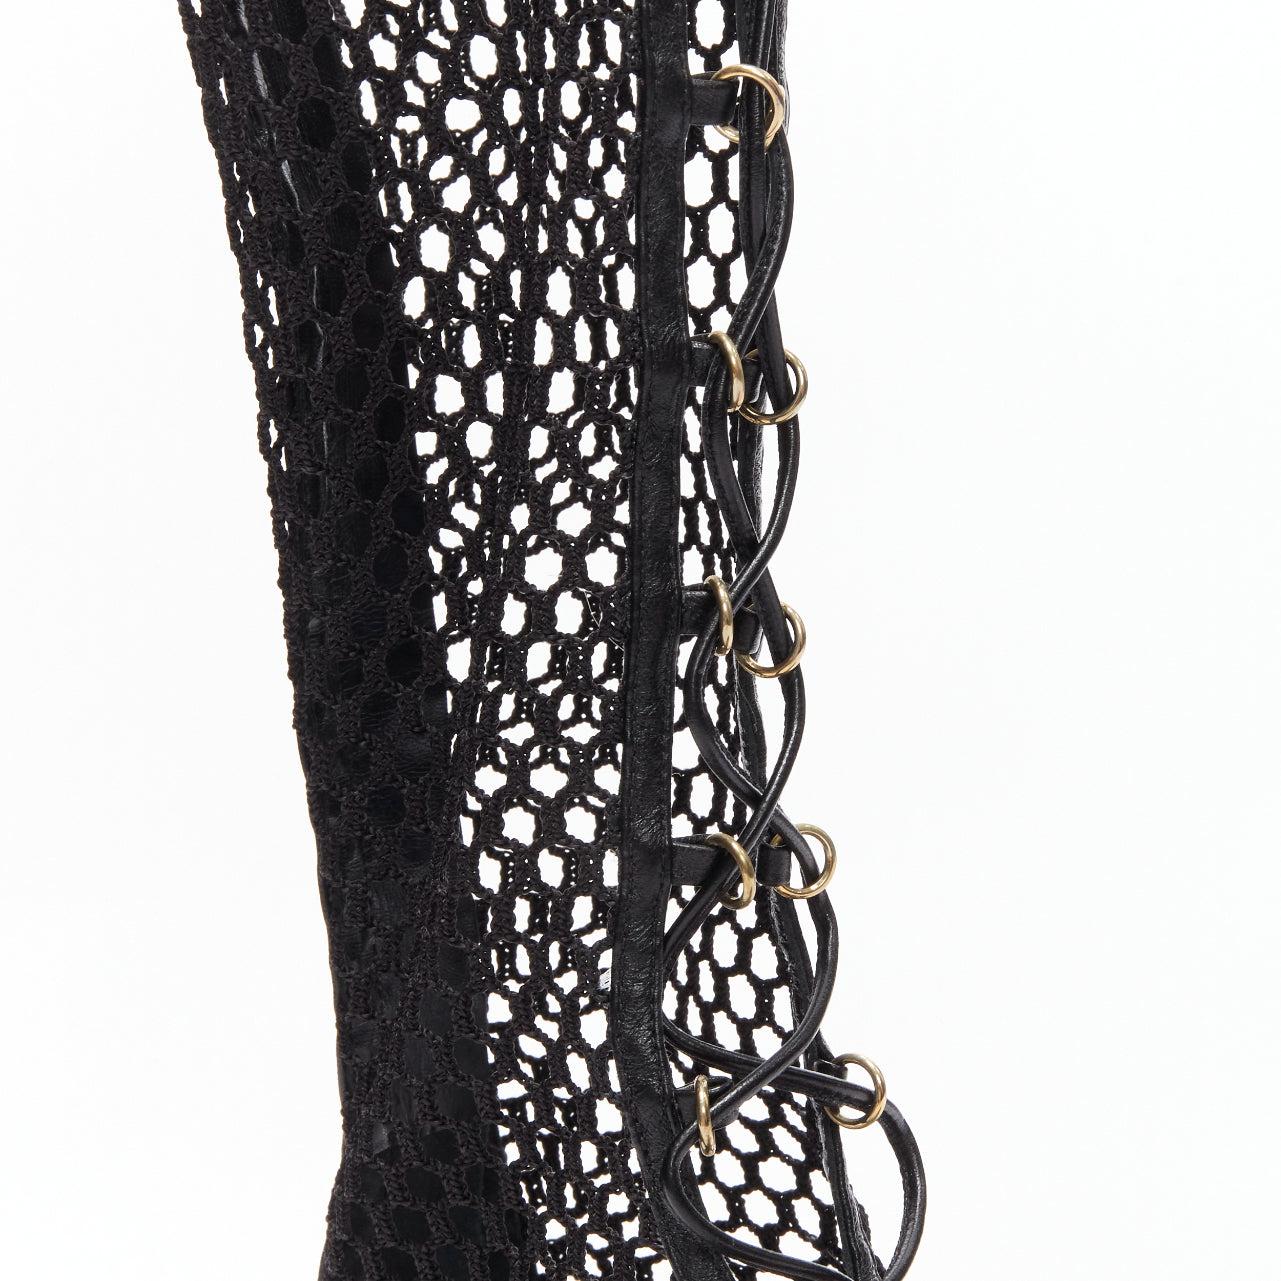 GIANVITO ROSSI Helena black crochet mesh gold rings lace up  sandals EU38 For Sale 2